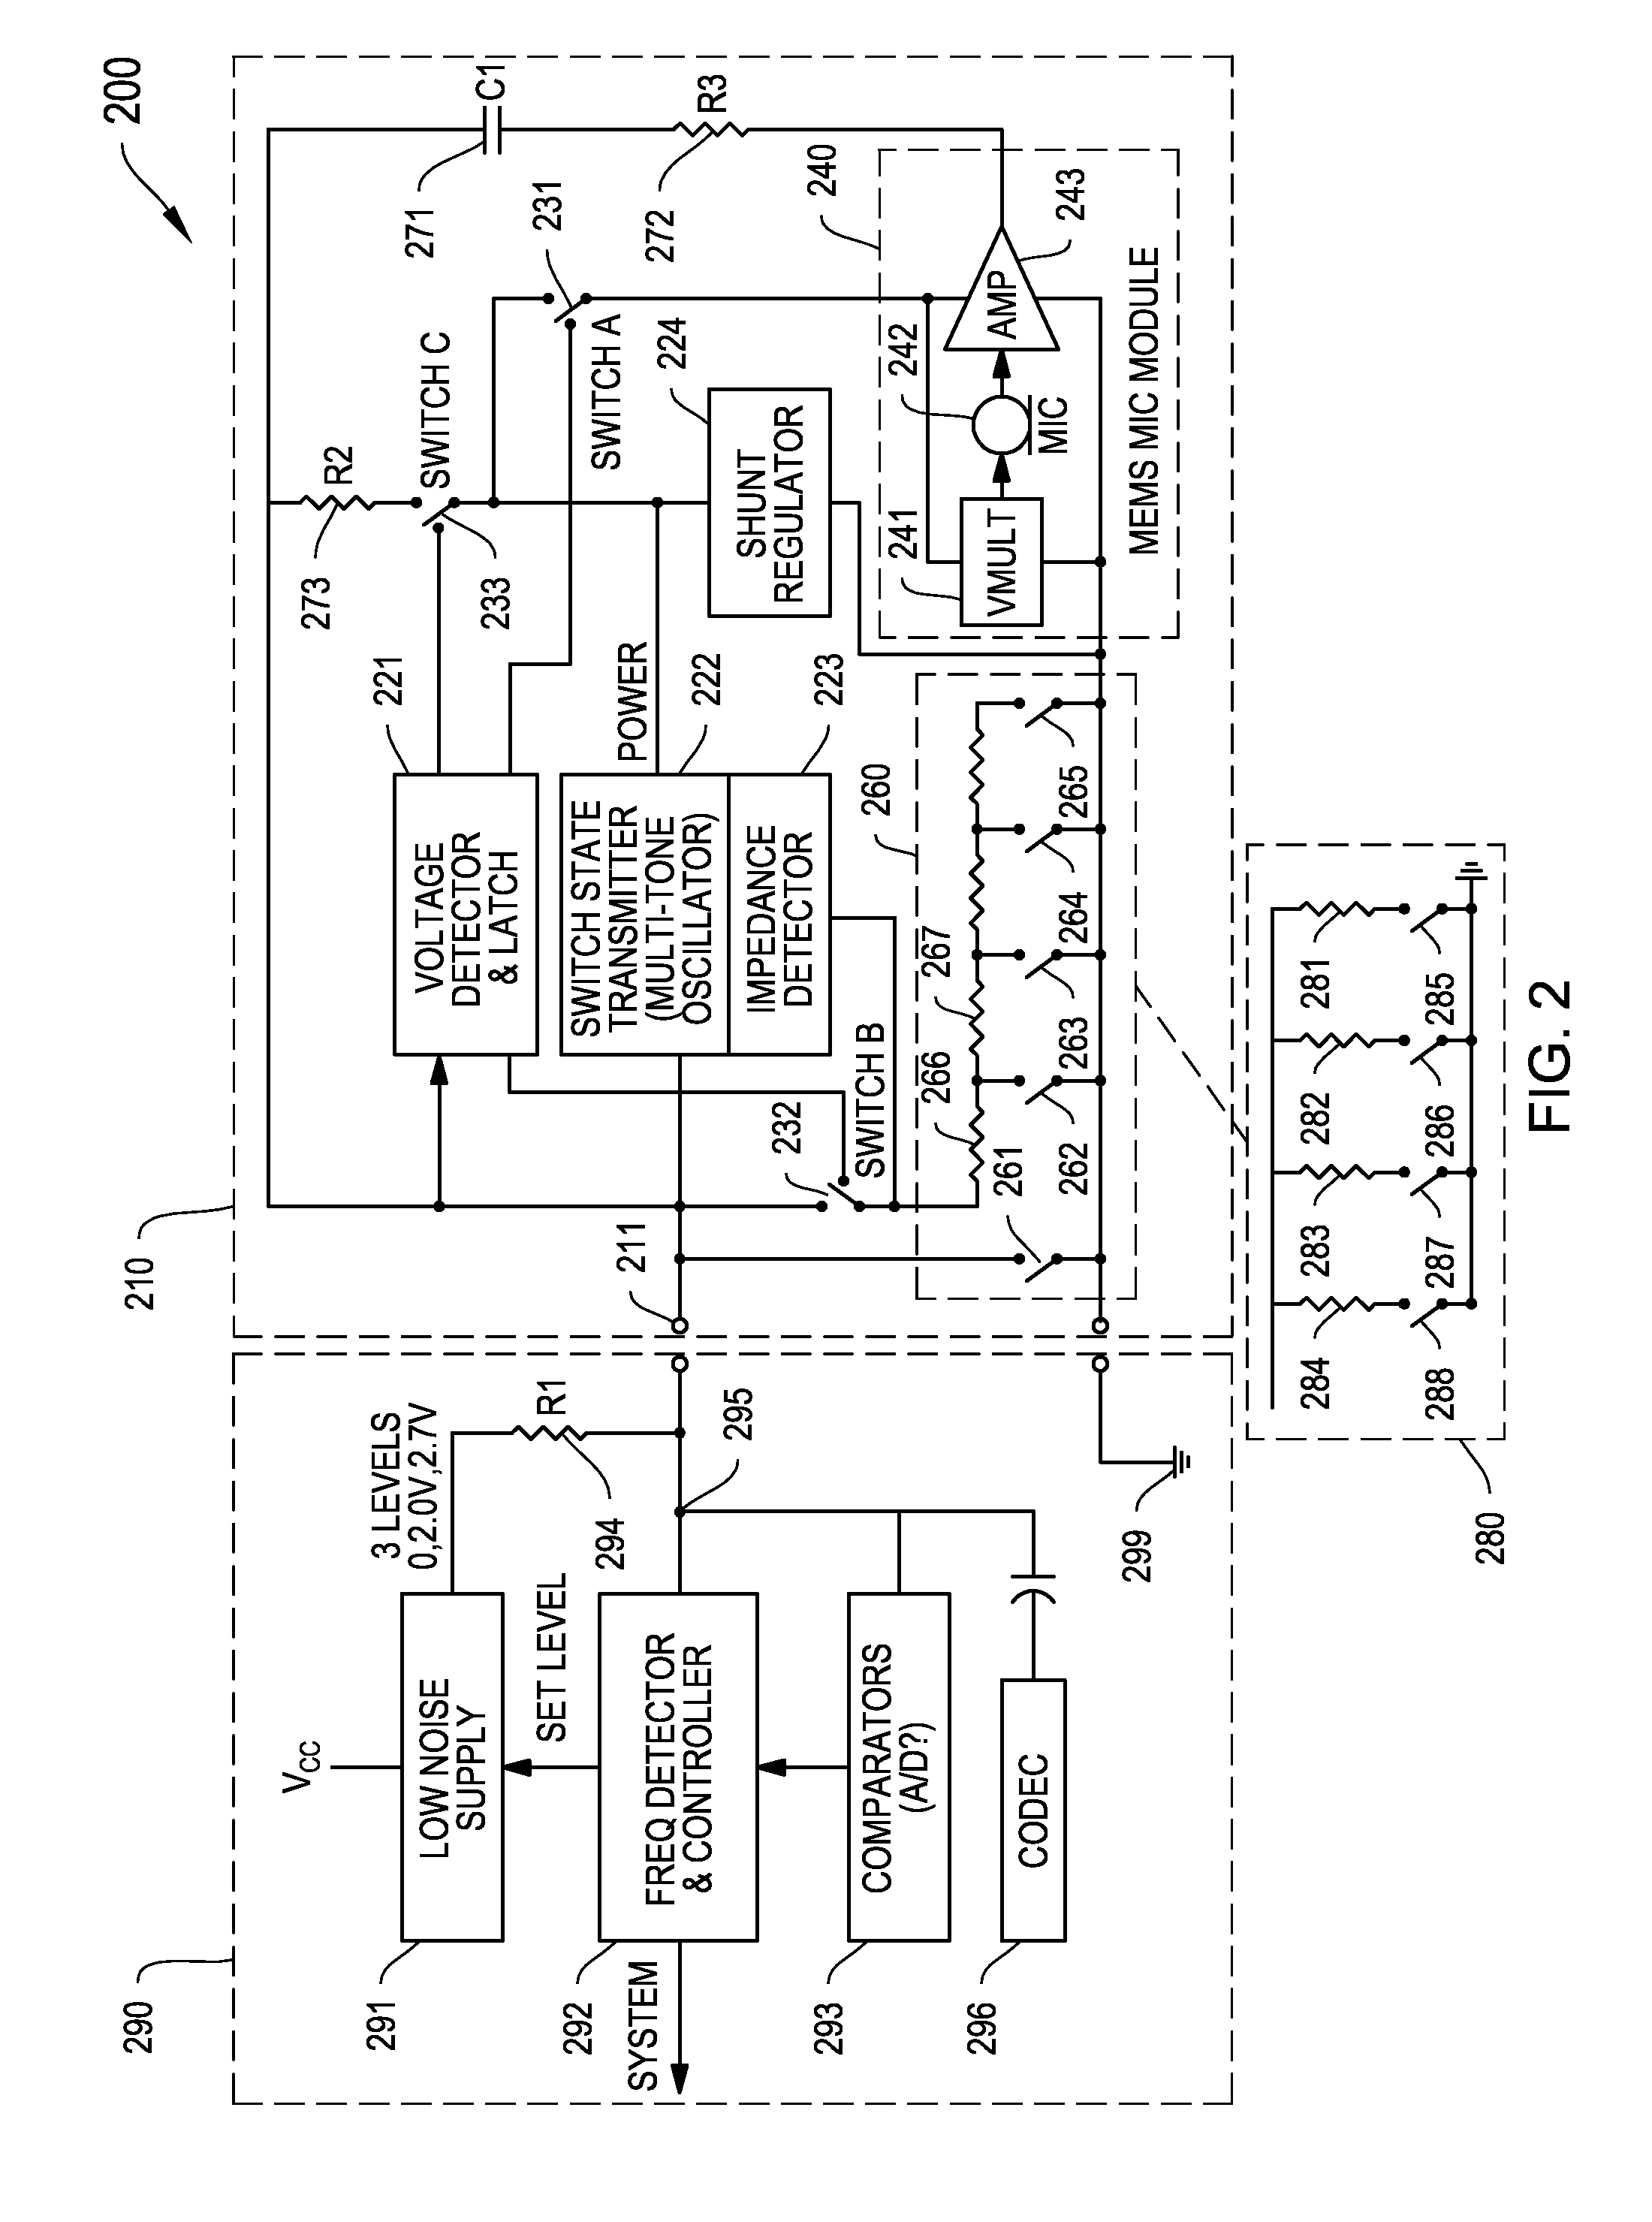 Electronic device control based on user gestures applied to a media headset